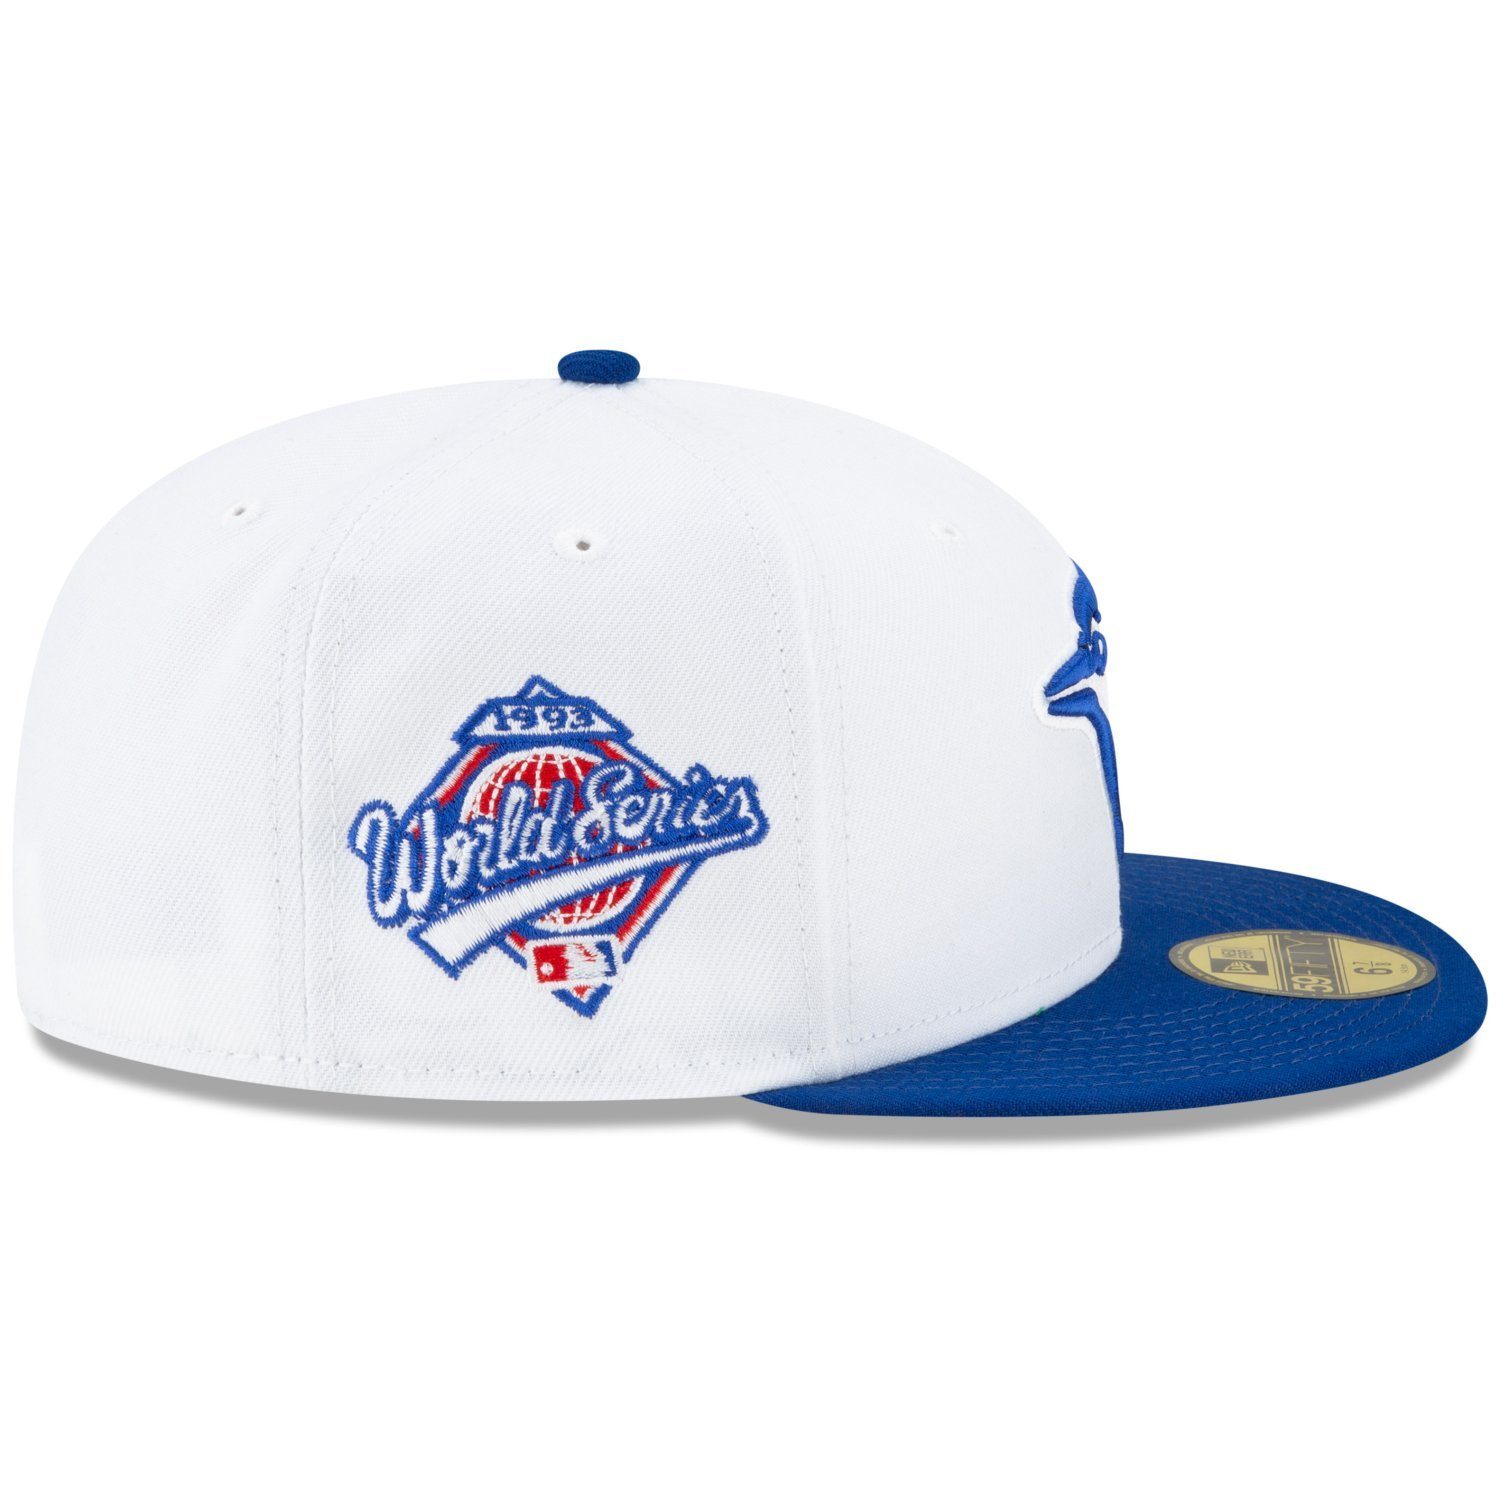 Cap Jays New SERIES 1993 Toronto Era WORLD Fitted 59Fifty